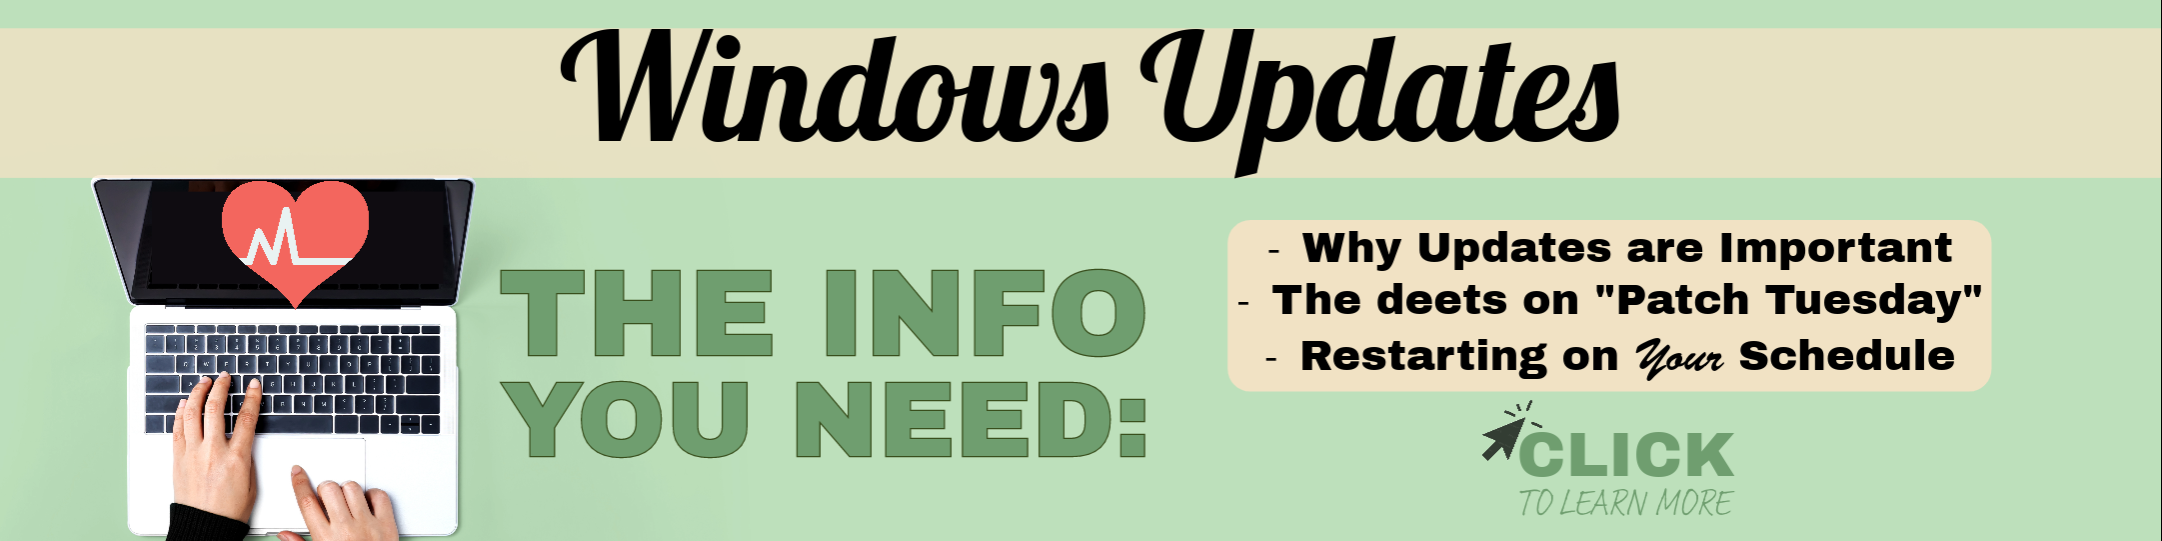 Windows Updates, laptop the info you need. Why Updates are Important The deets on "Patch Tuesday" Restarting on Your Schedule